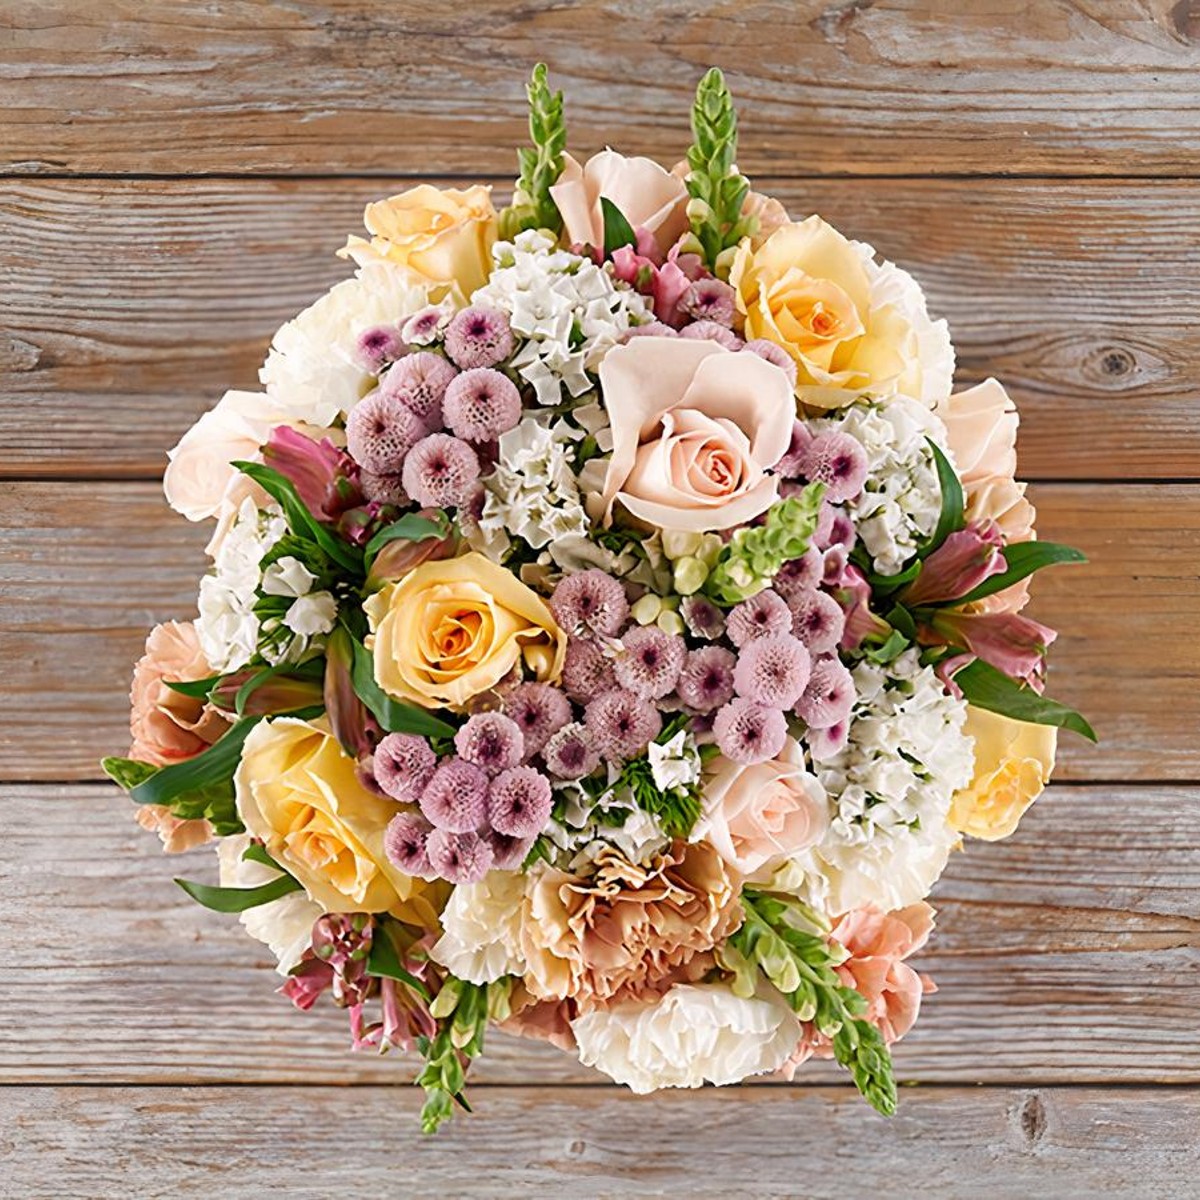 Sympathy Flowers Delivery: Sympathy Bouquets - The Bouqs Co.